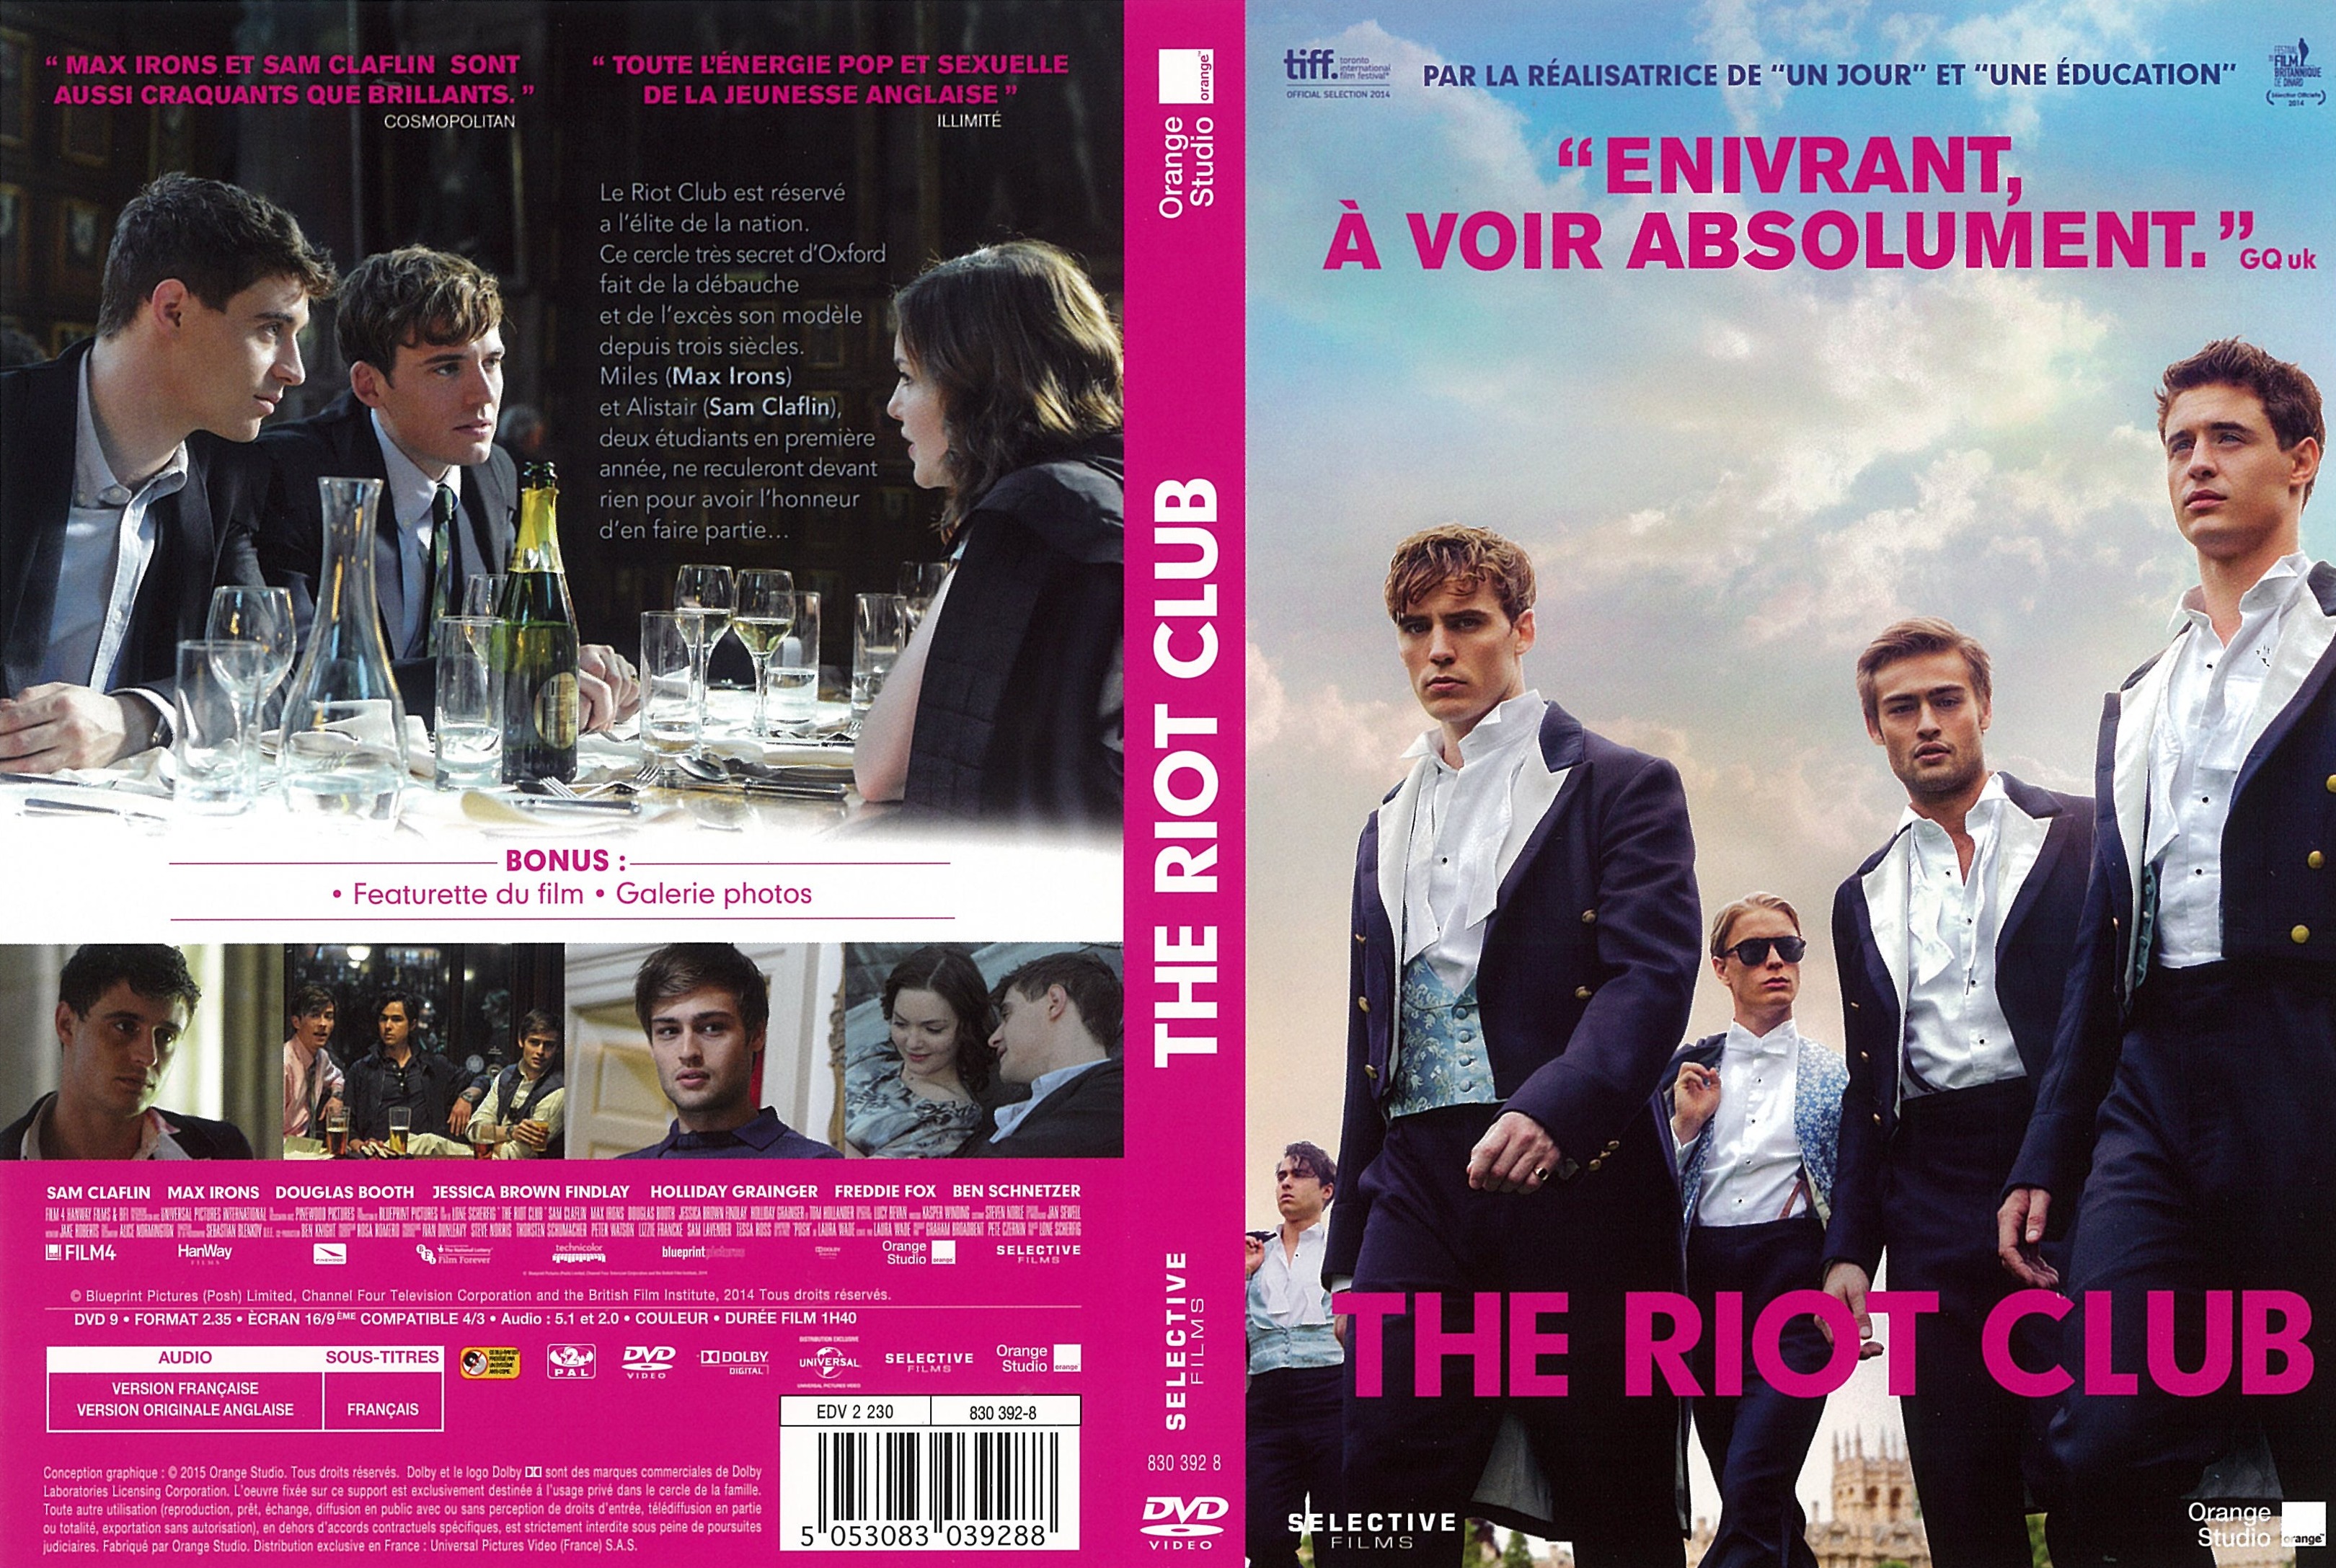 Jaquette DVD The Riot Club